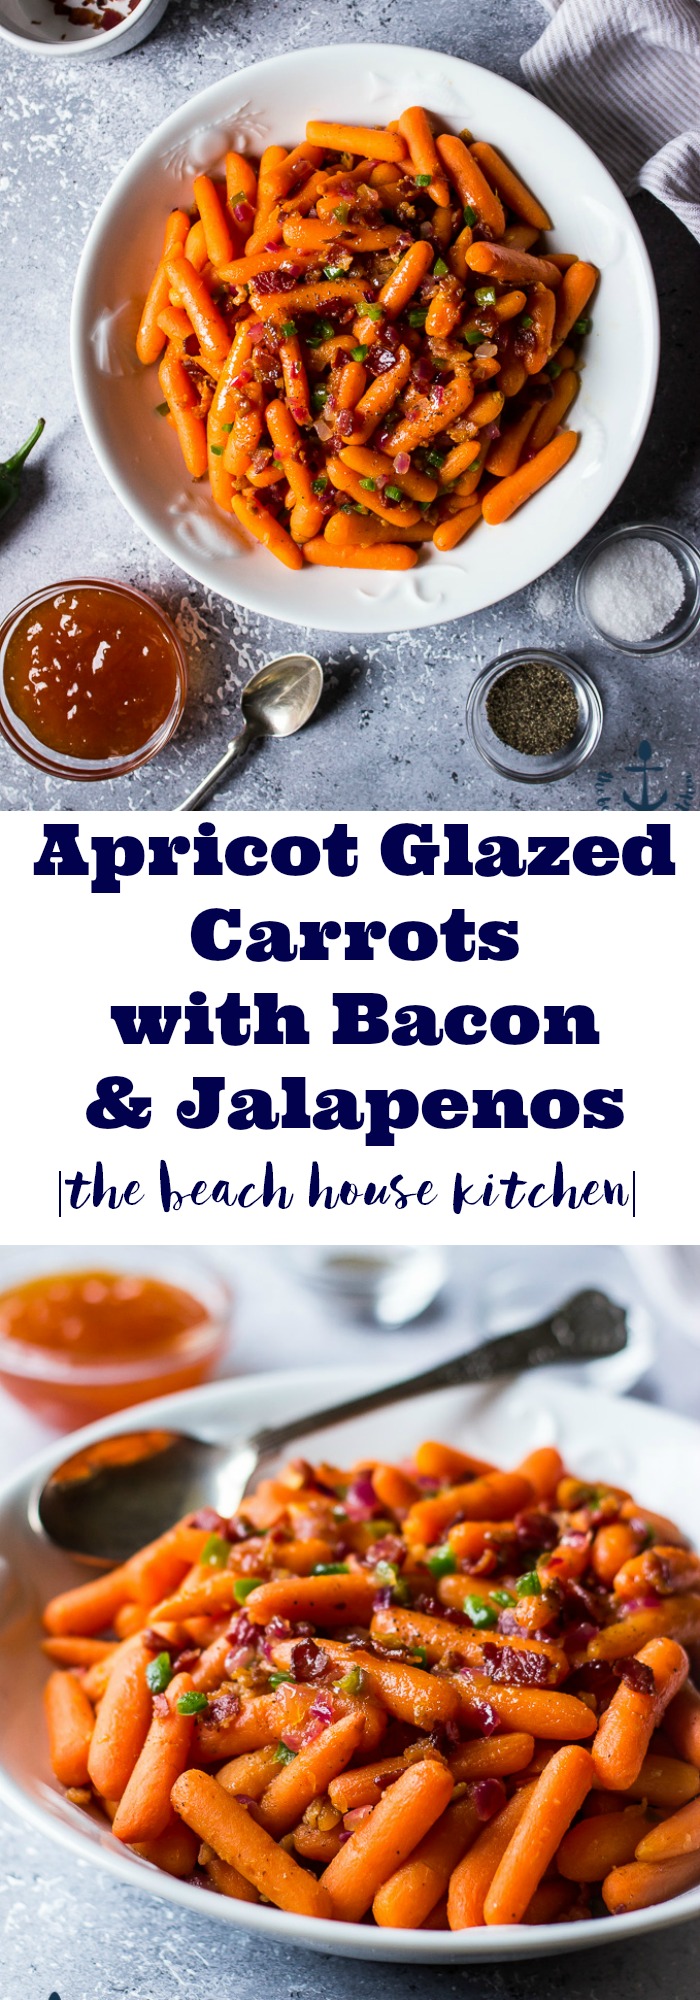 Apricot Glazed Carrots with Bacon and Jalapenos